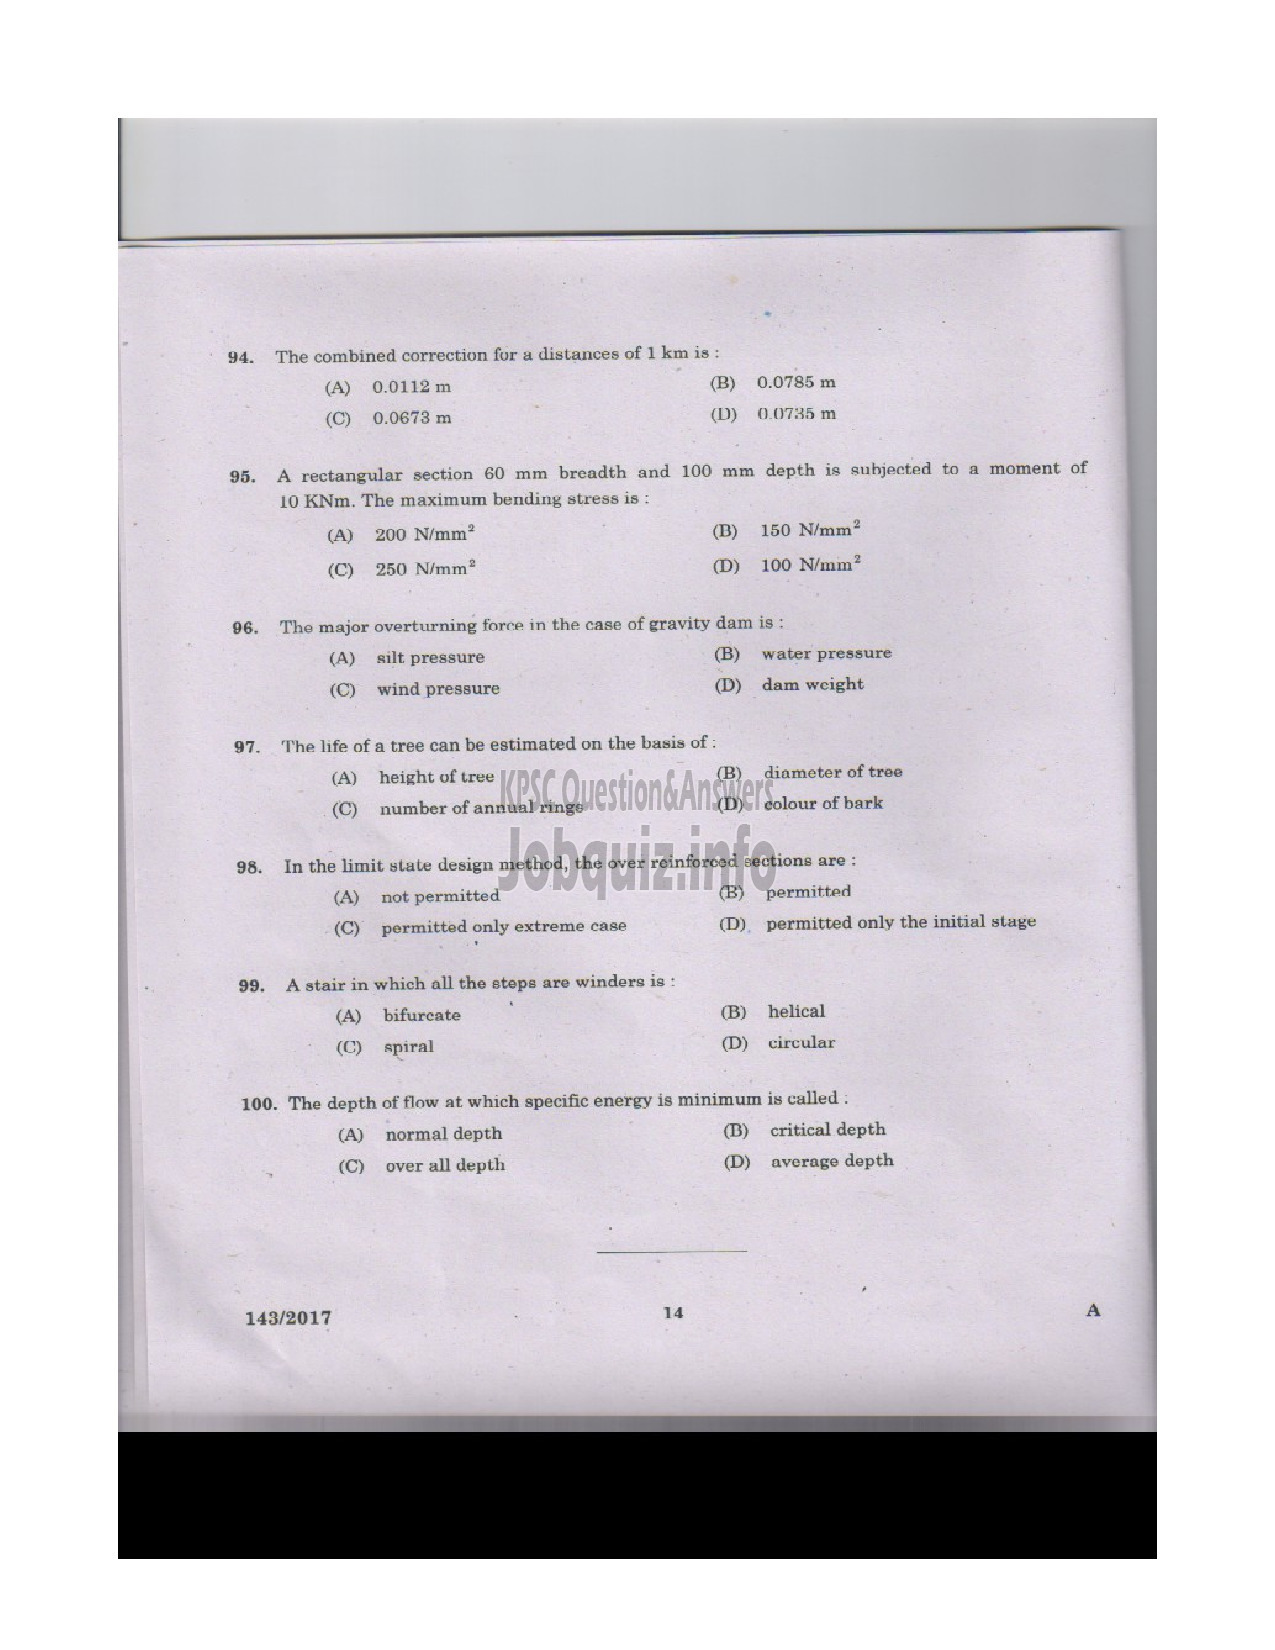 Kerala PSC Question Paper - VOCATIONAL INSTRUCTOR IN CIVIL CONSTRUCTION ANDMAINTENANCE VOCATIONAL HIGHER SECONDARY-13